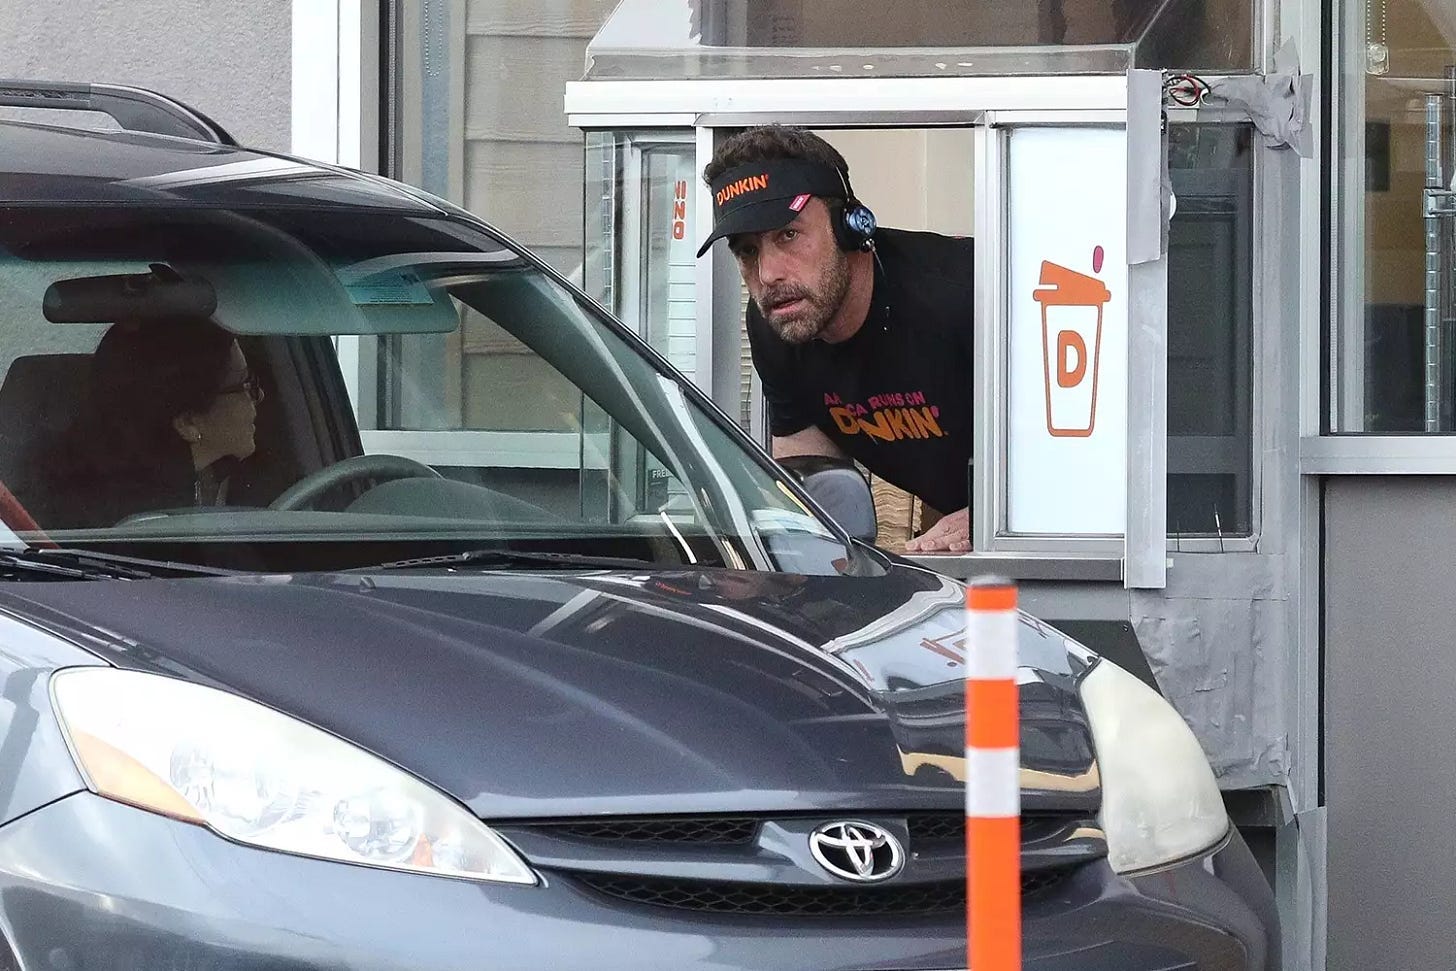 *PREMIUM-EXCLUSIVE* <a href="https://people.com/tag/ben-affleck" data-inlink="true">Ben Affleck</a> surprising customers when working the drive-through at Dunkin Donuts